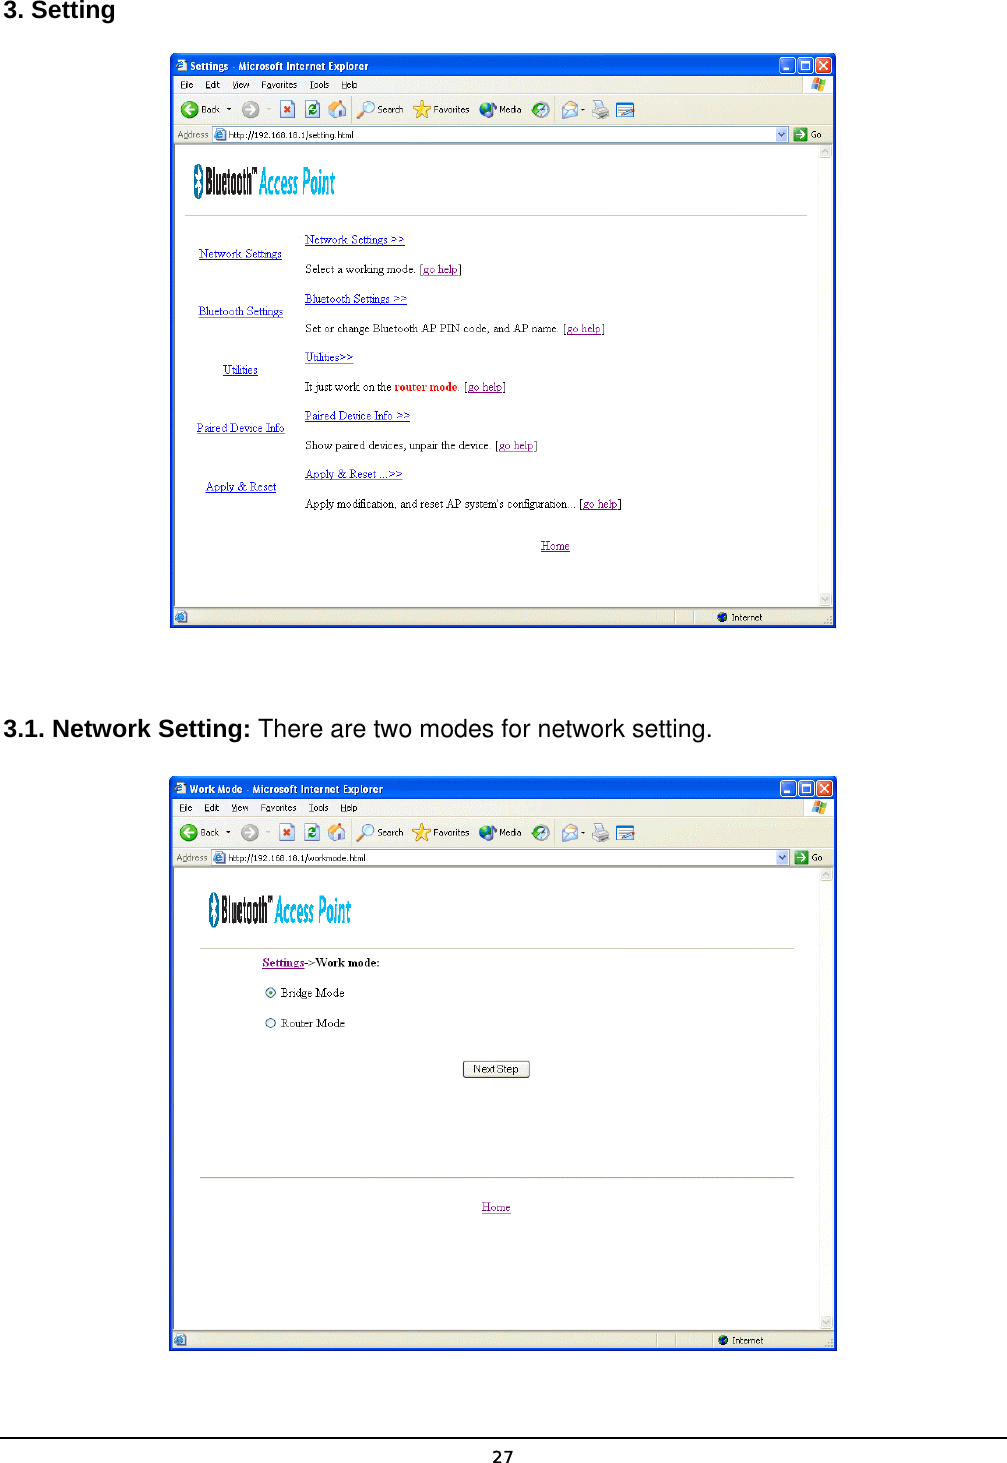   273. Setting   3.1. Network Setting: There are two modes for network setting.  